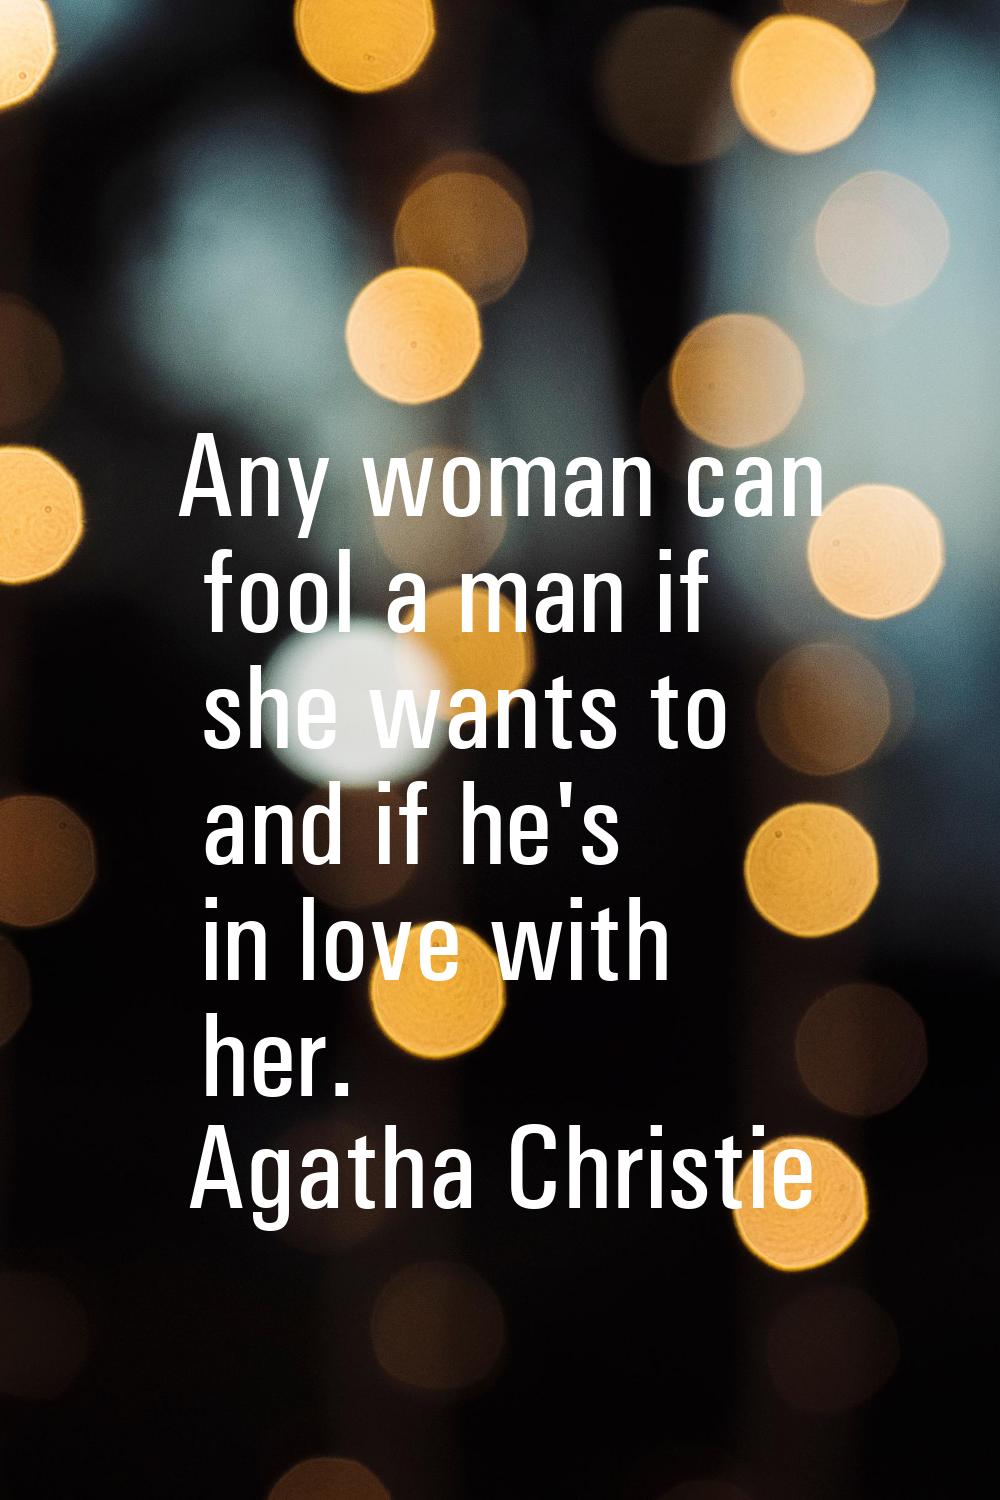 Any woman can fool a man if she wants to and if he's in love with her.